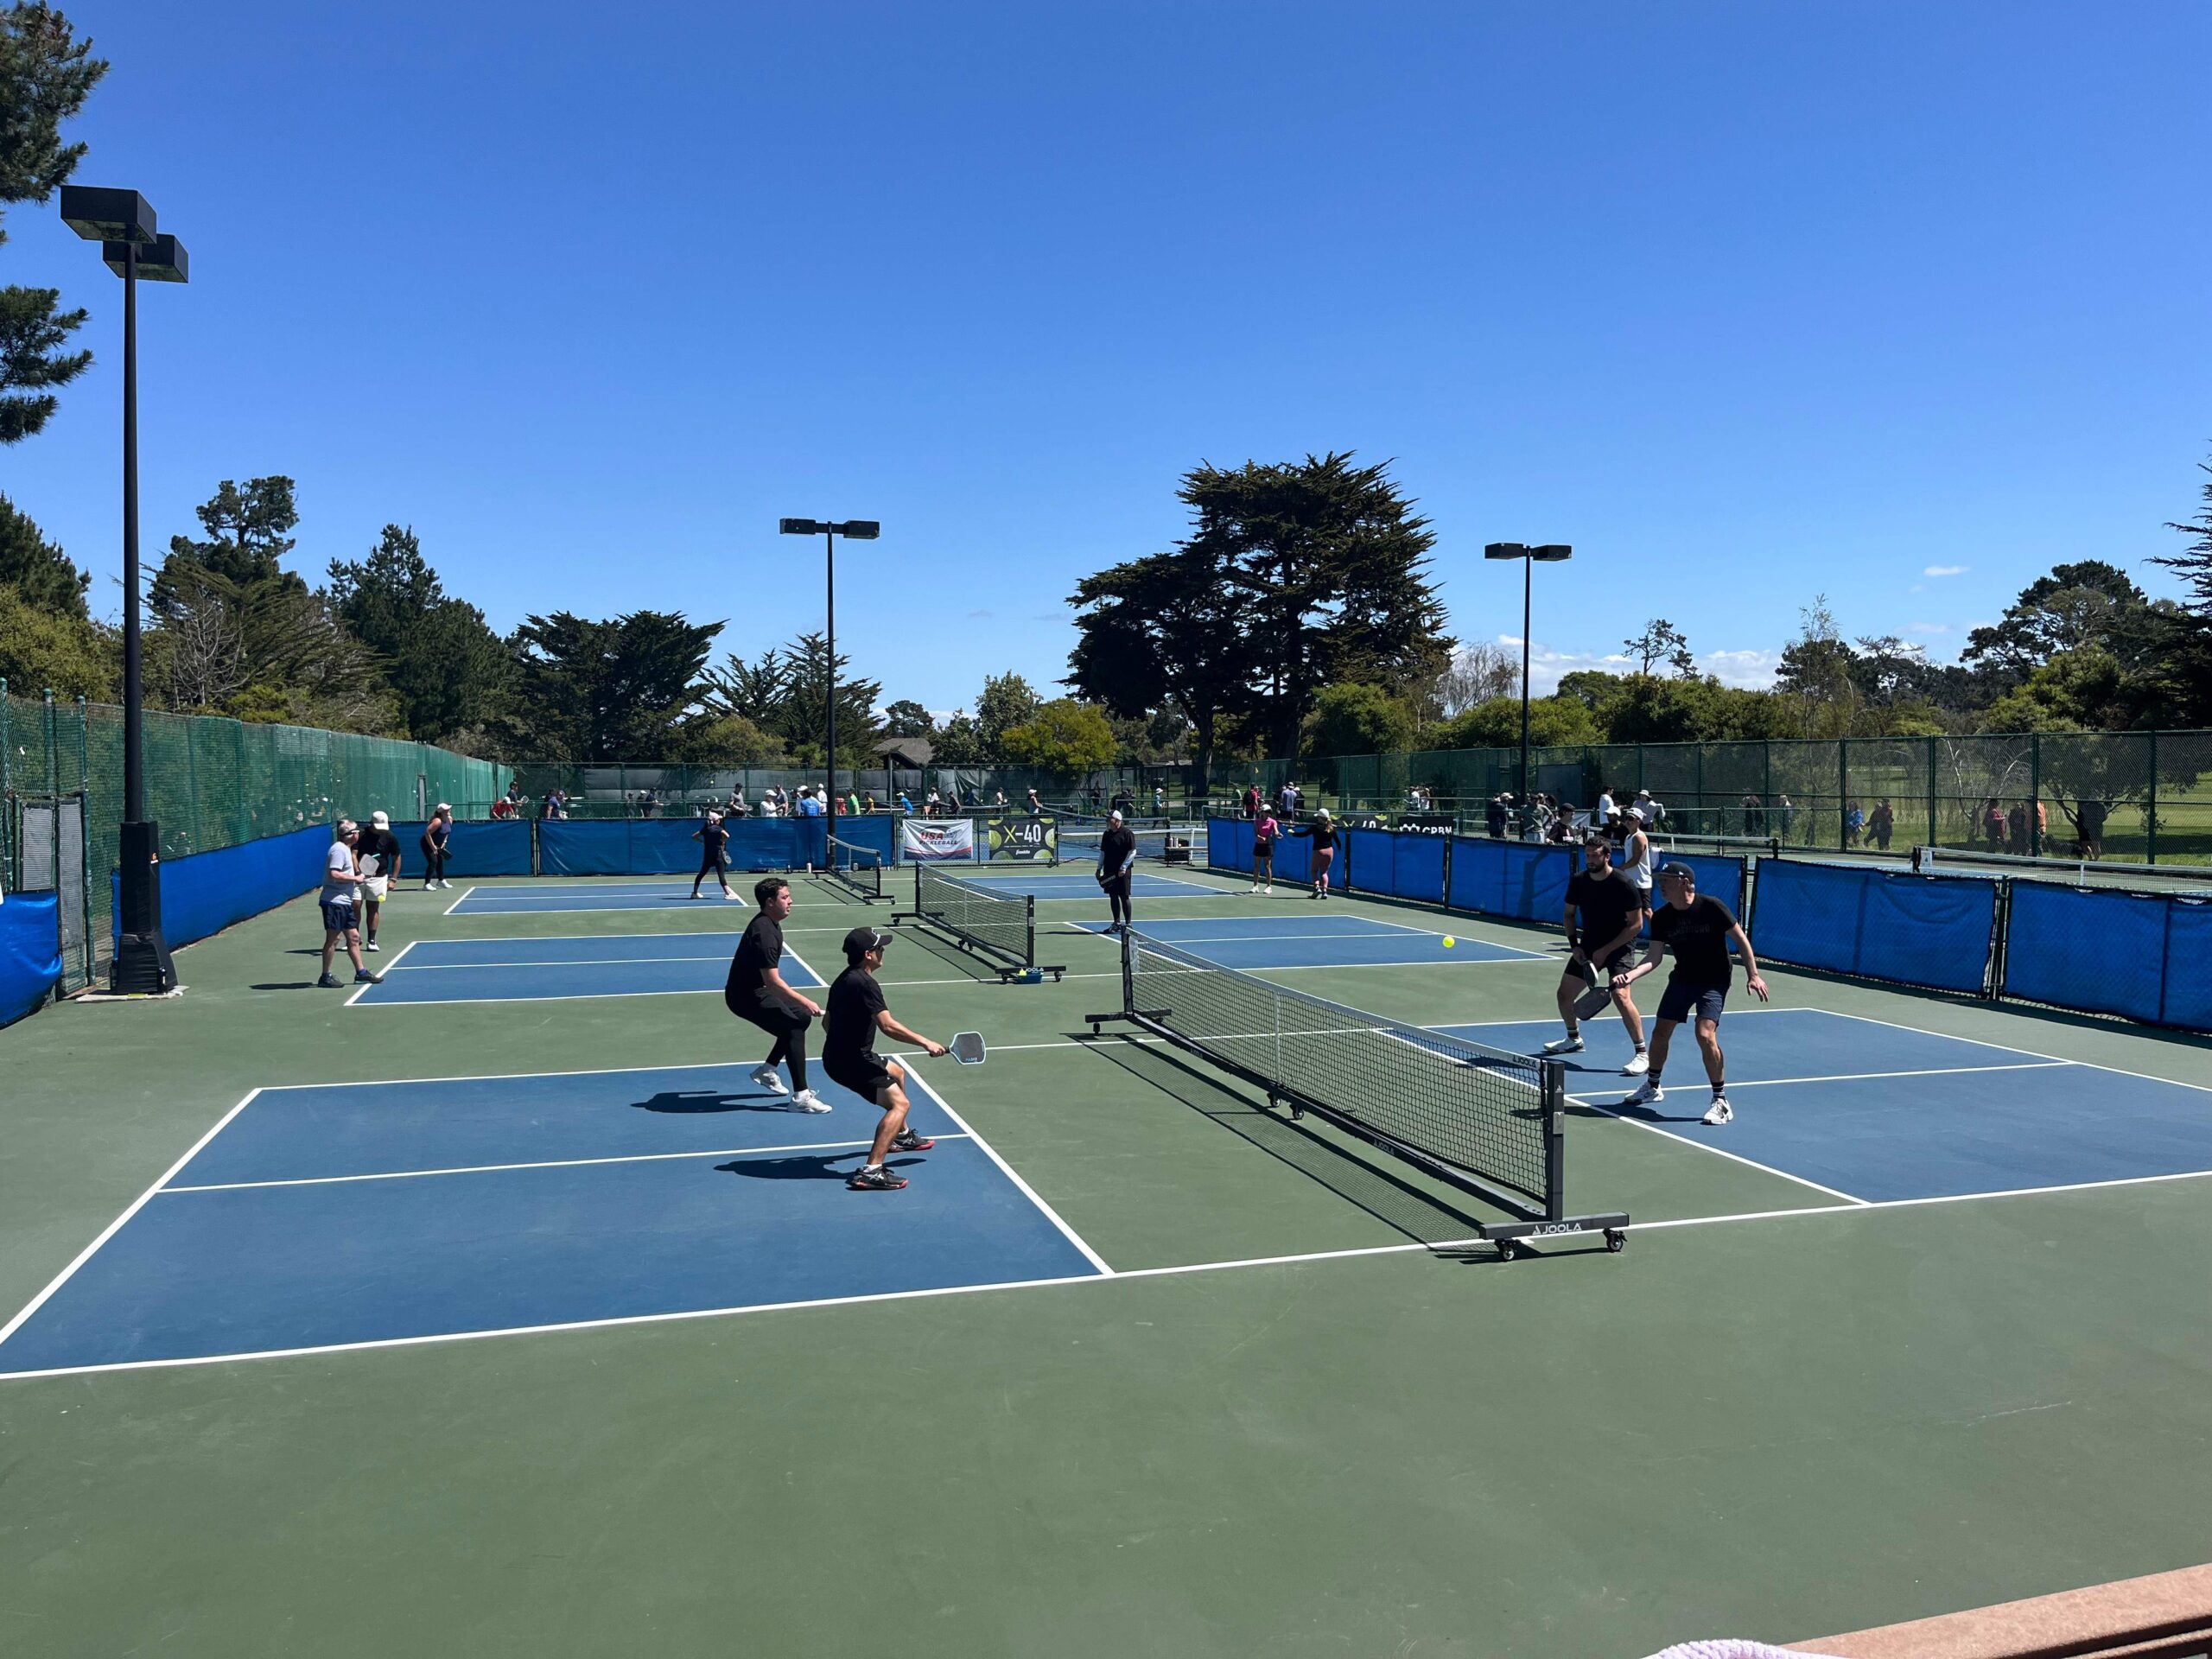 My First Pickleball Tournament: 10 Tips and 5 Things Not To Do